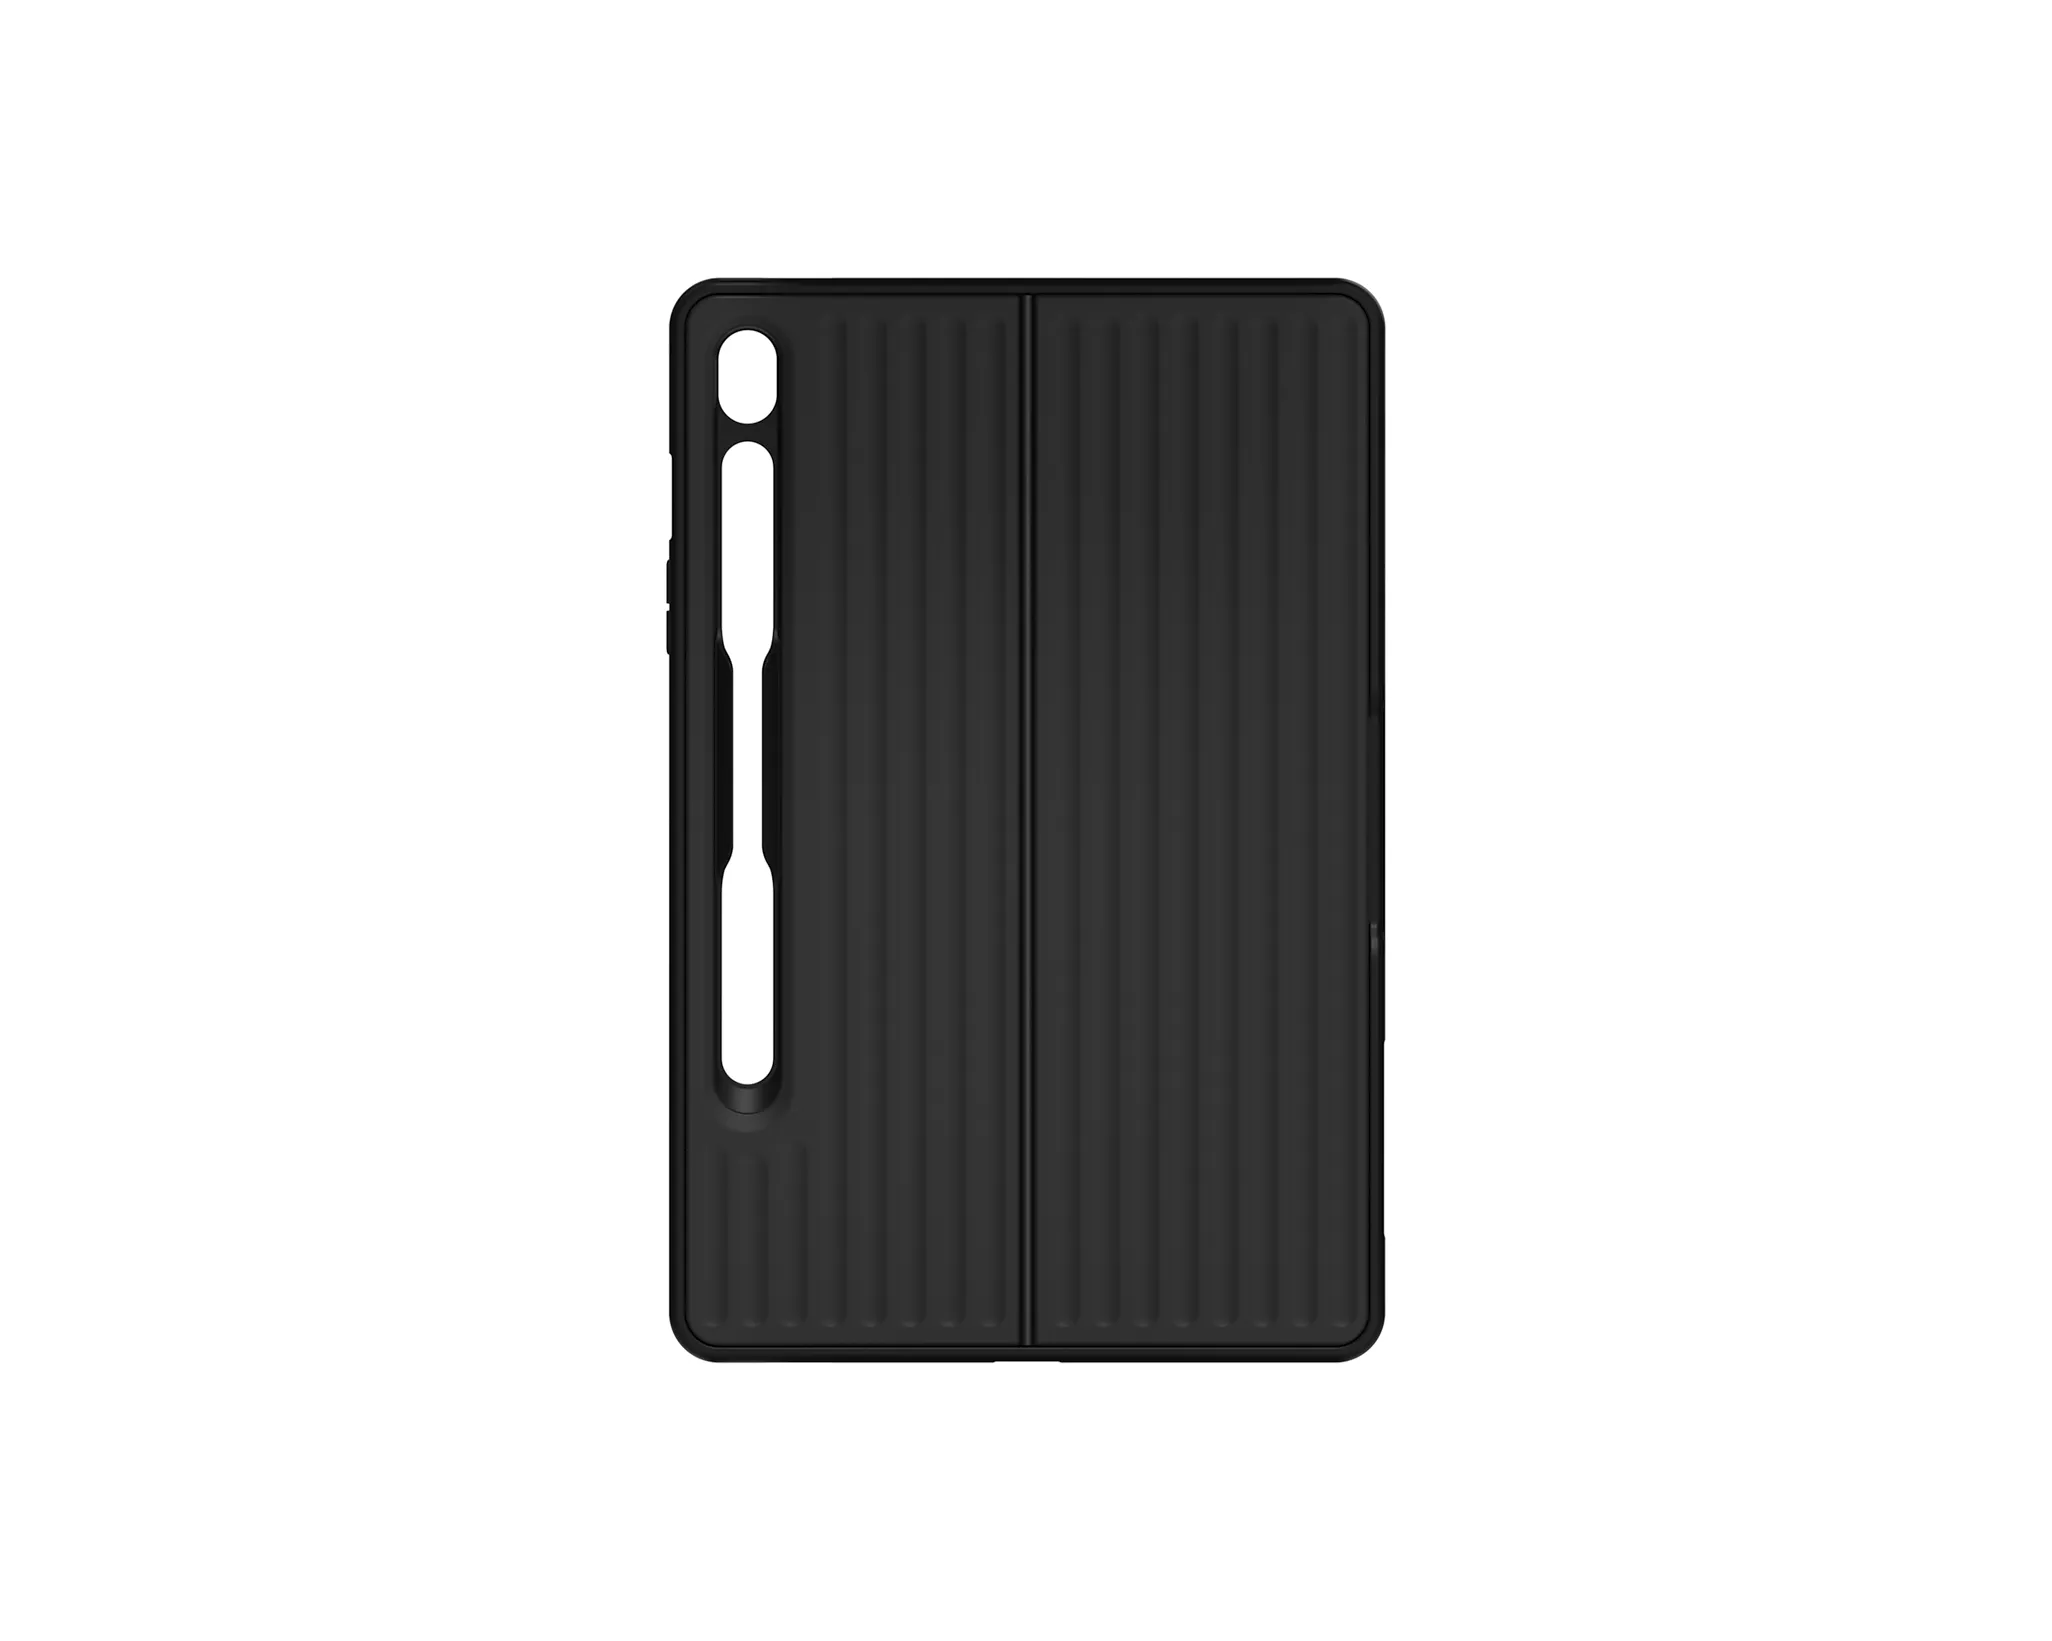 Achat SAMSUNG Reinforced back cover with stand function Black au meilleur prix